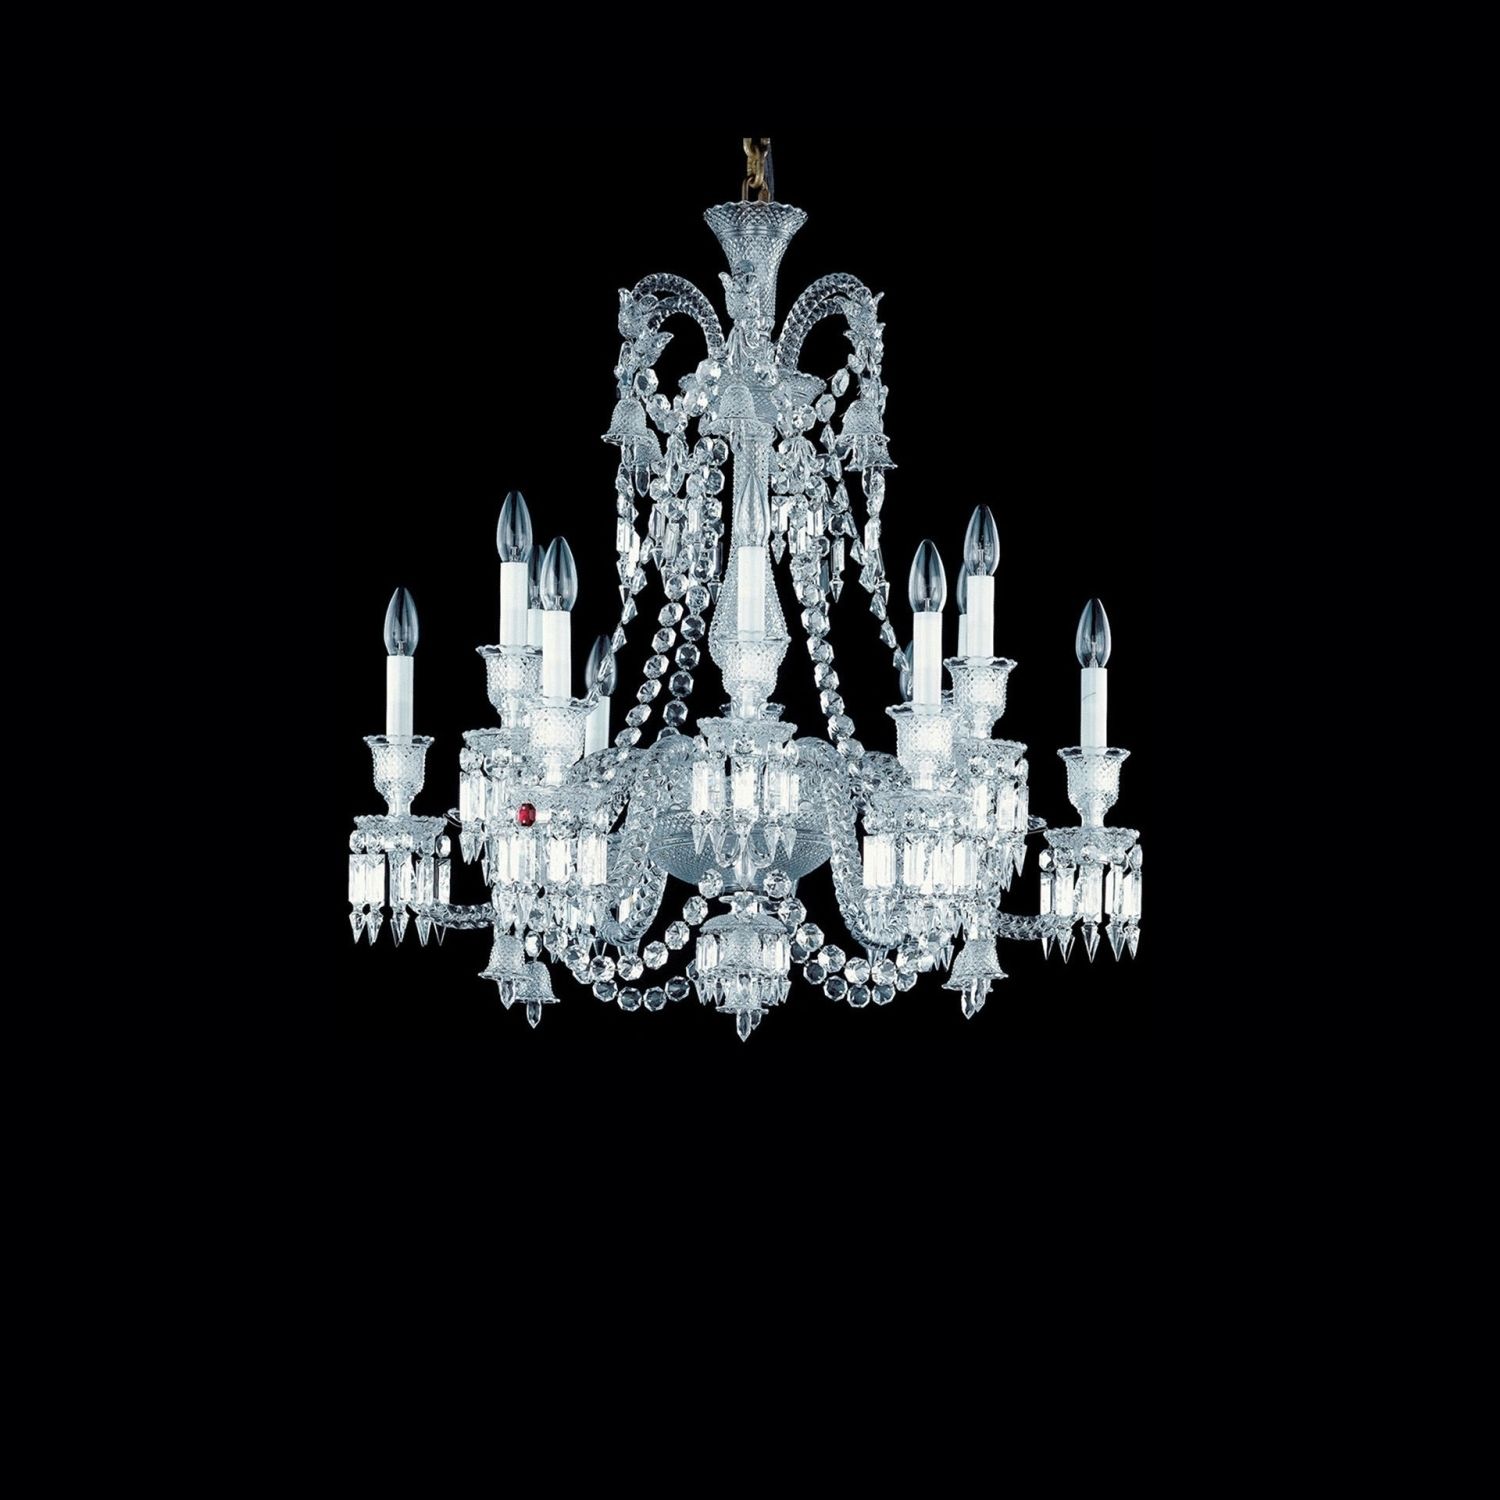 Chandelier Clear 12l Baccarat Zenith 2606555 Throughout 2019 Short Chandeliers (View 1 of 20)